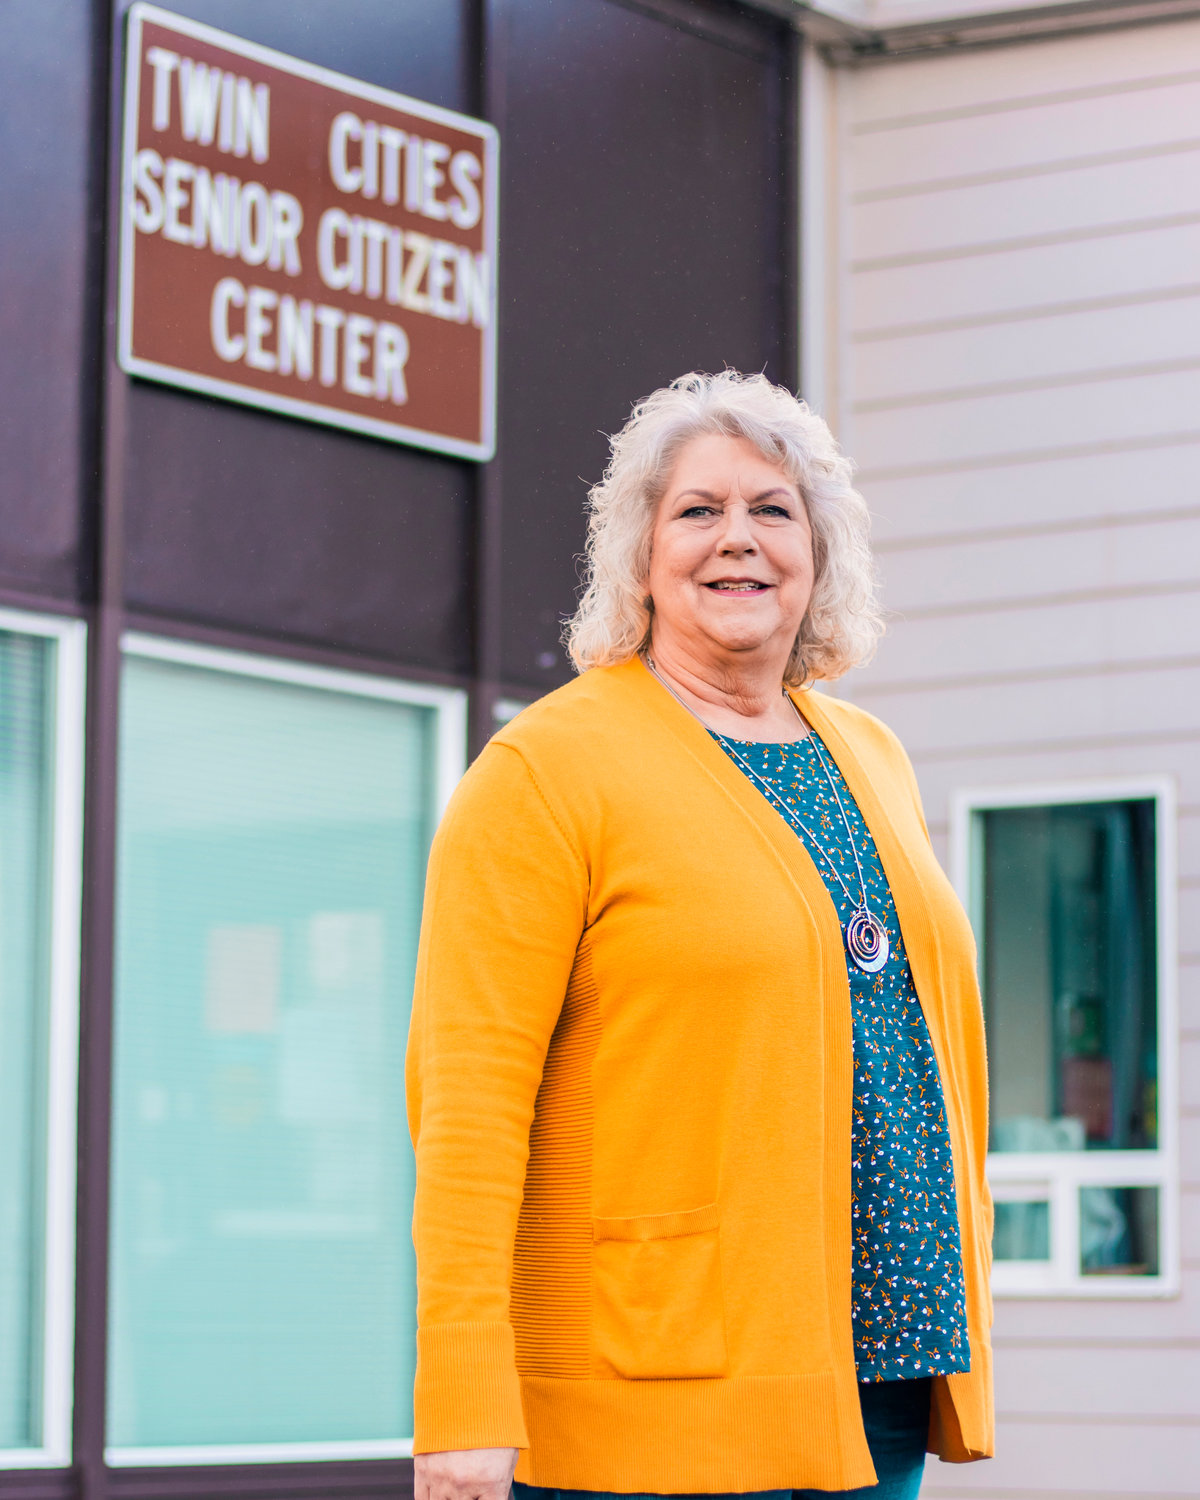 Lewis County Seniors Executive Director Glenda Forga smiles and poses for a photo outside the Twin Cities Senior Center in Chehalis on Wednesday.